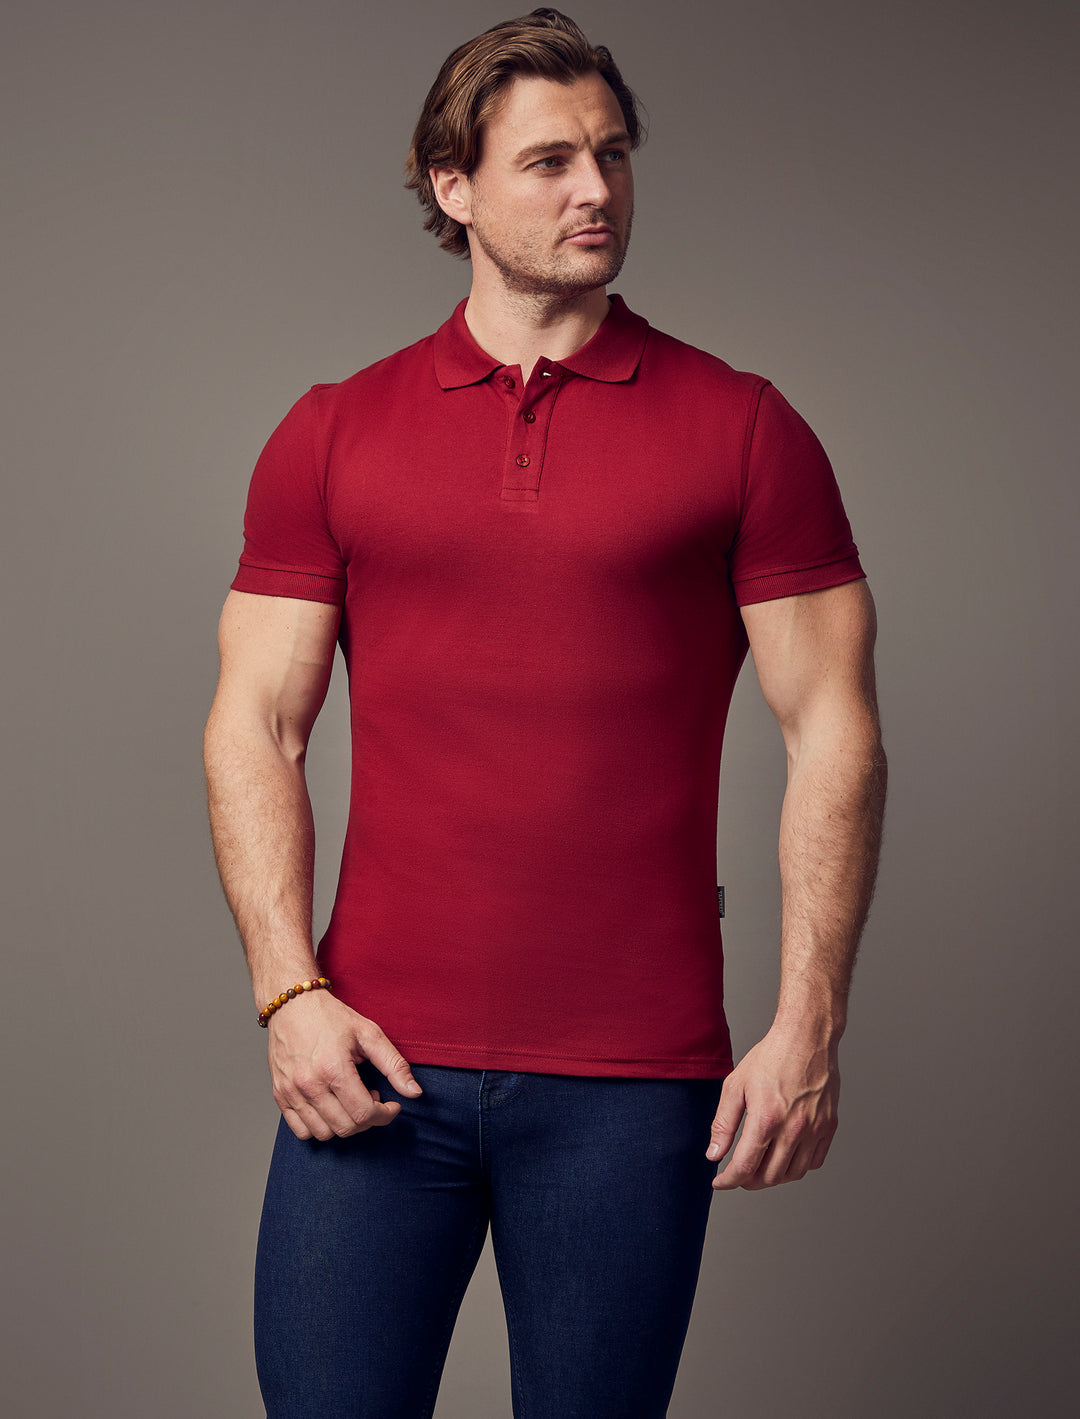 Burgundy short-sleeve polo shirt with a muscle fit from Tapered Menswear, showcasing the tapered design and superior quality.